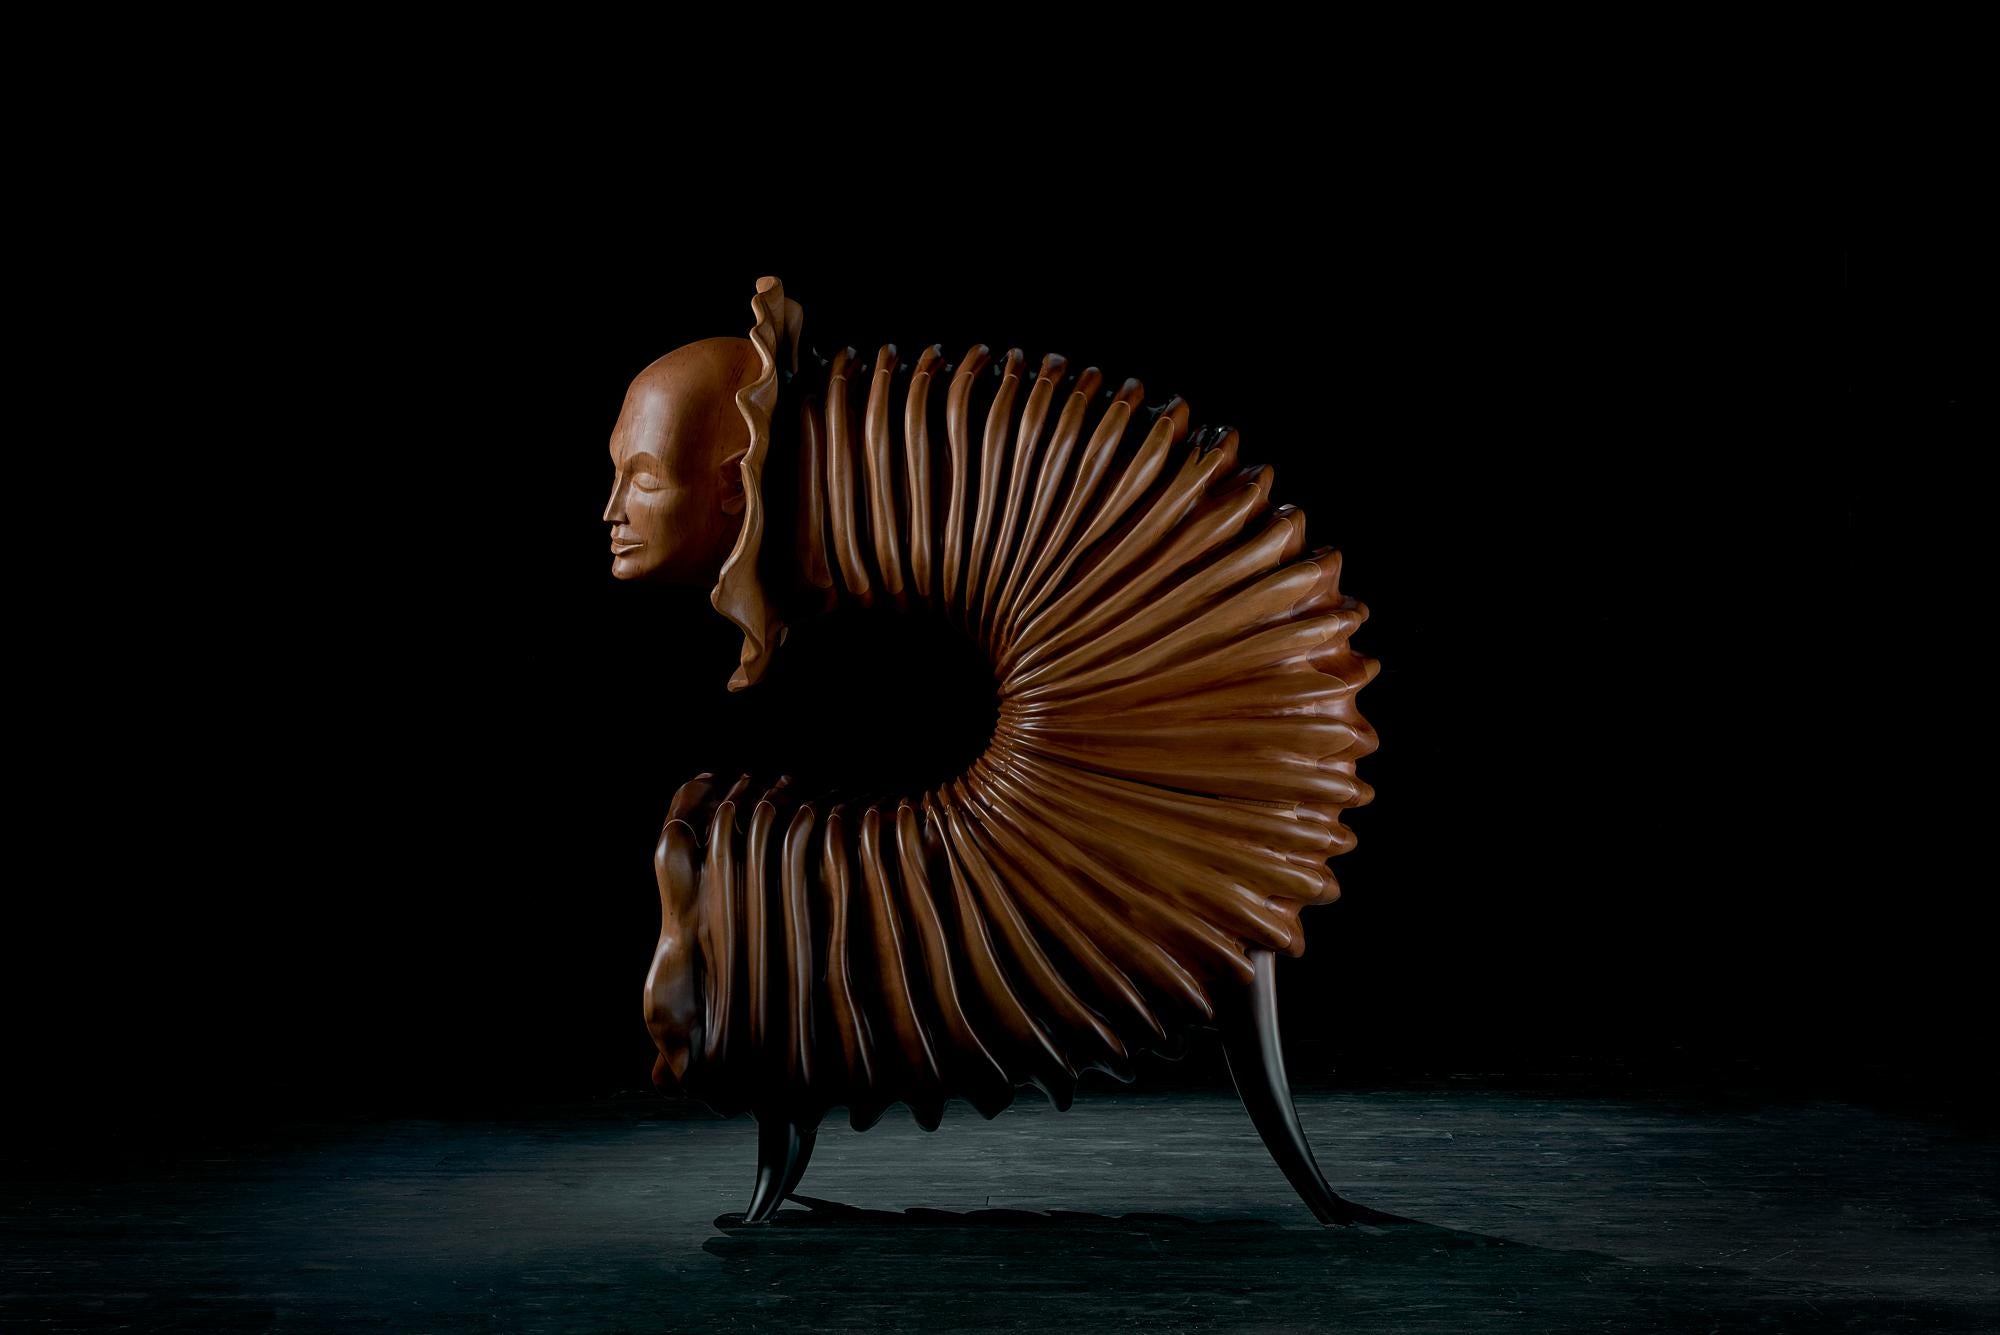 Carved 'The Dreamer' Limited Edition Sculptural Cabinet from Egli Design